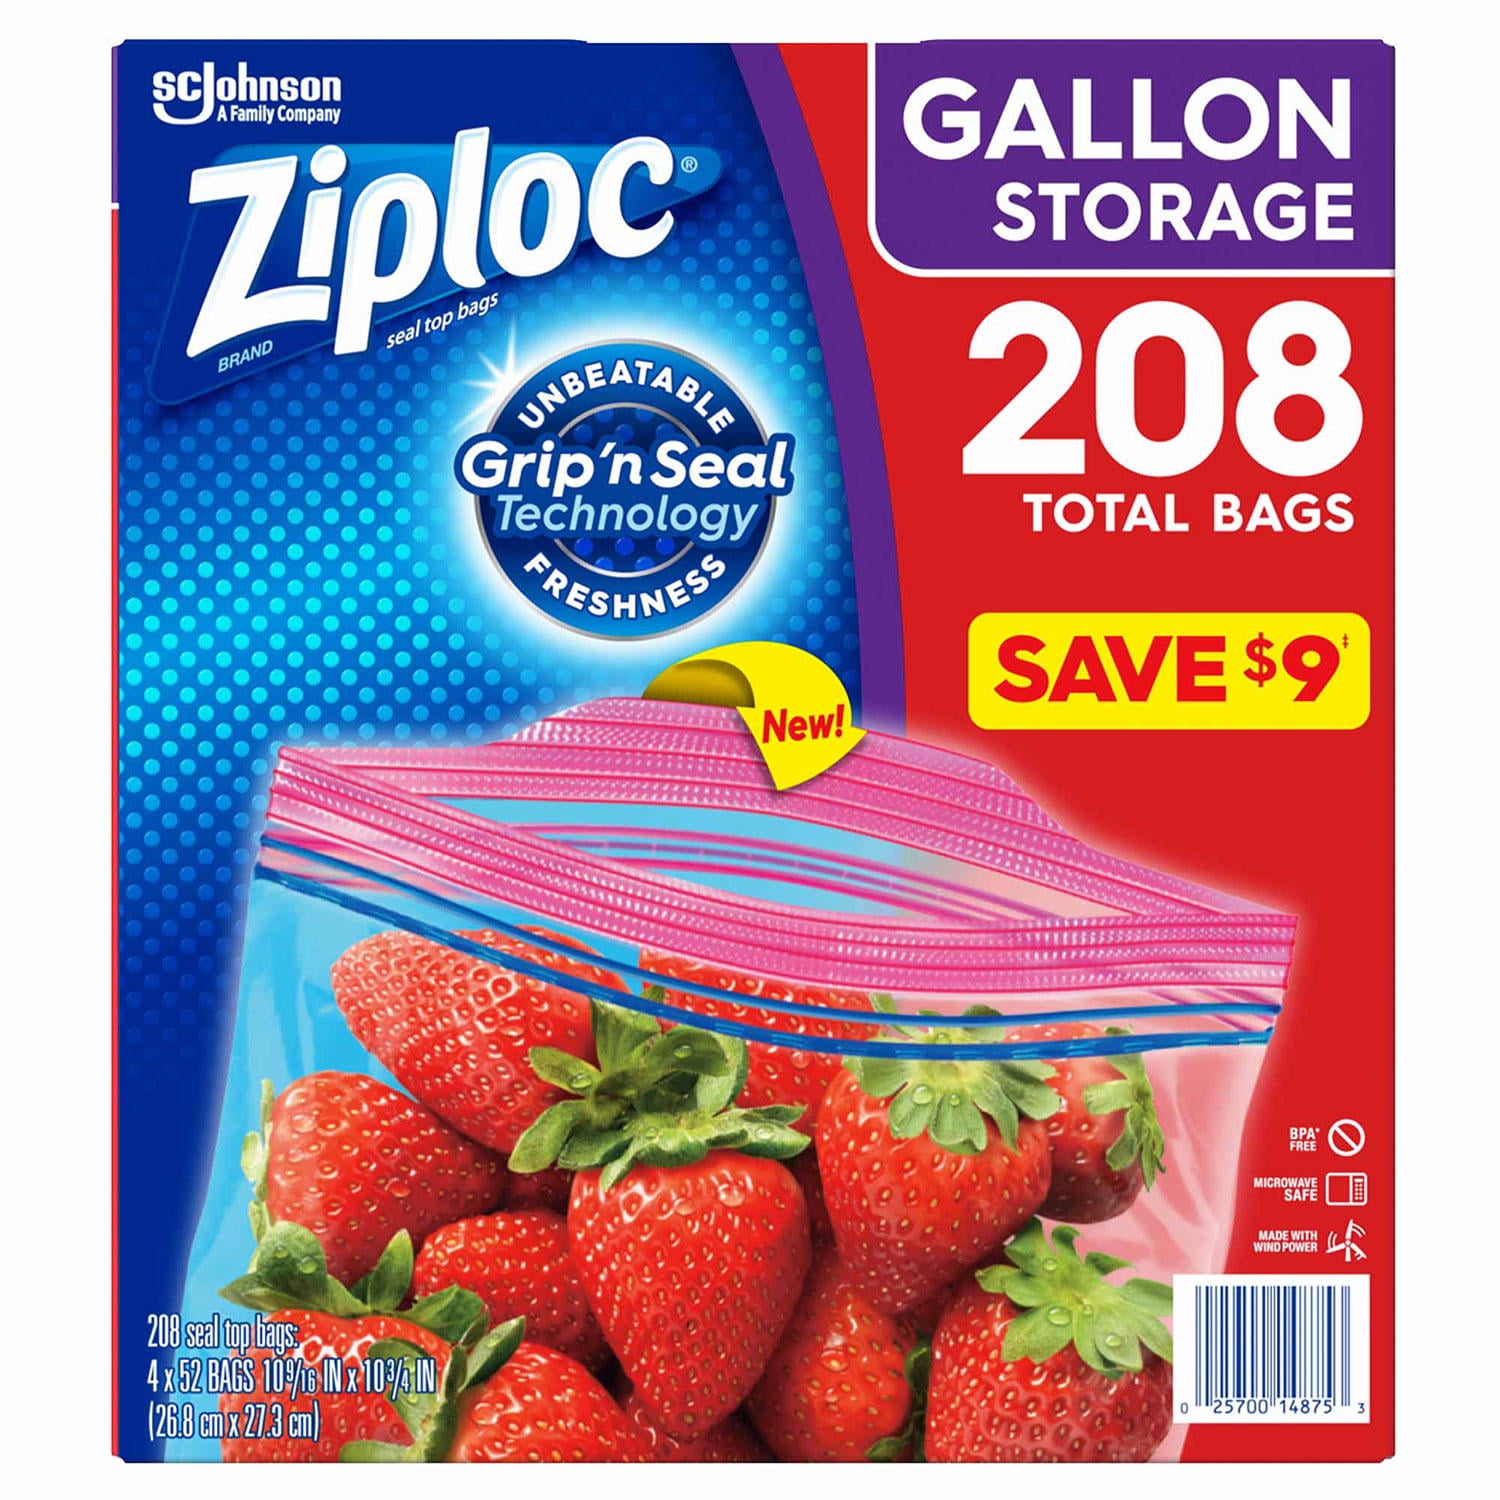 Ziploc® Gallon Storage Bags with Stay Open Design, 19 ct - Fred Meyer